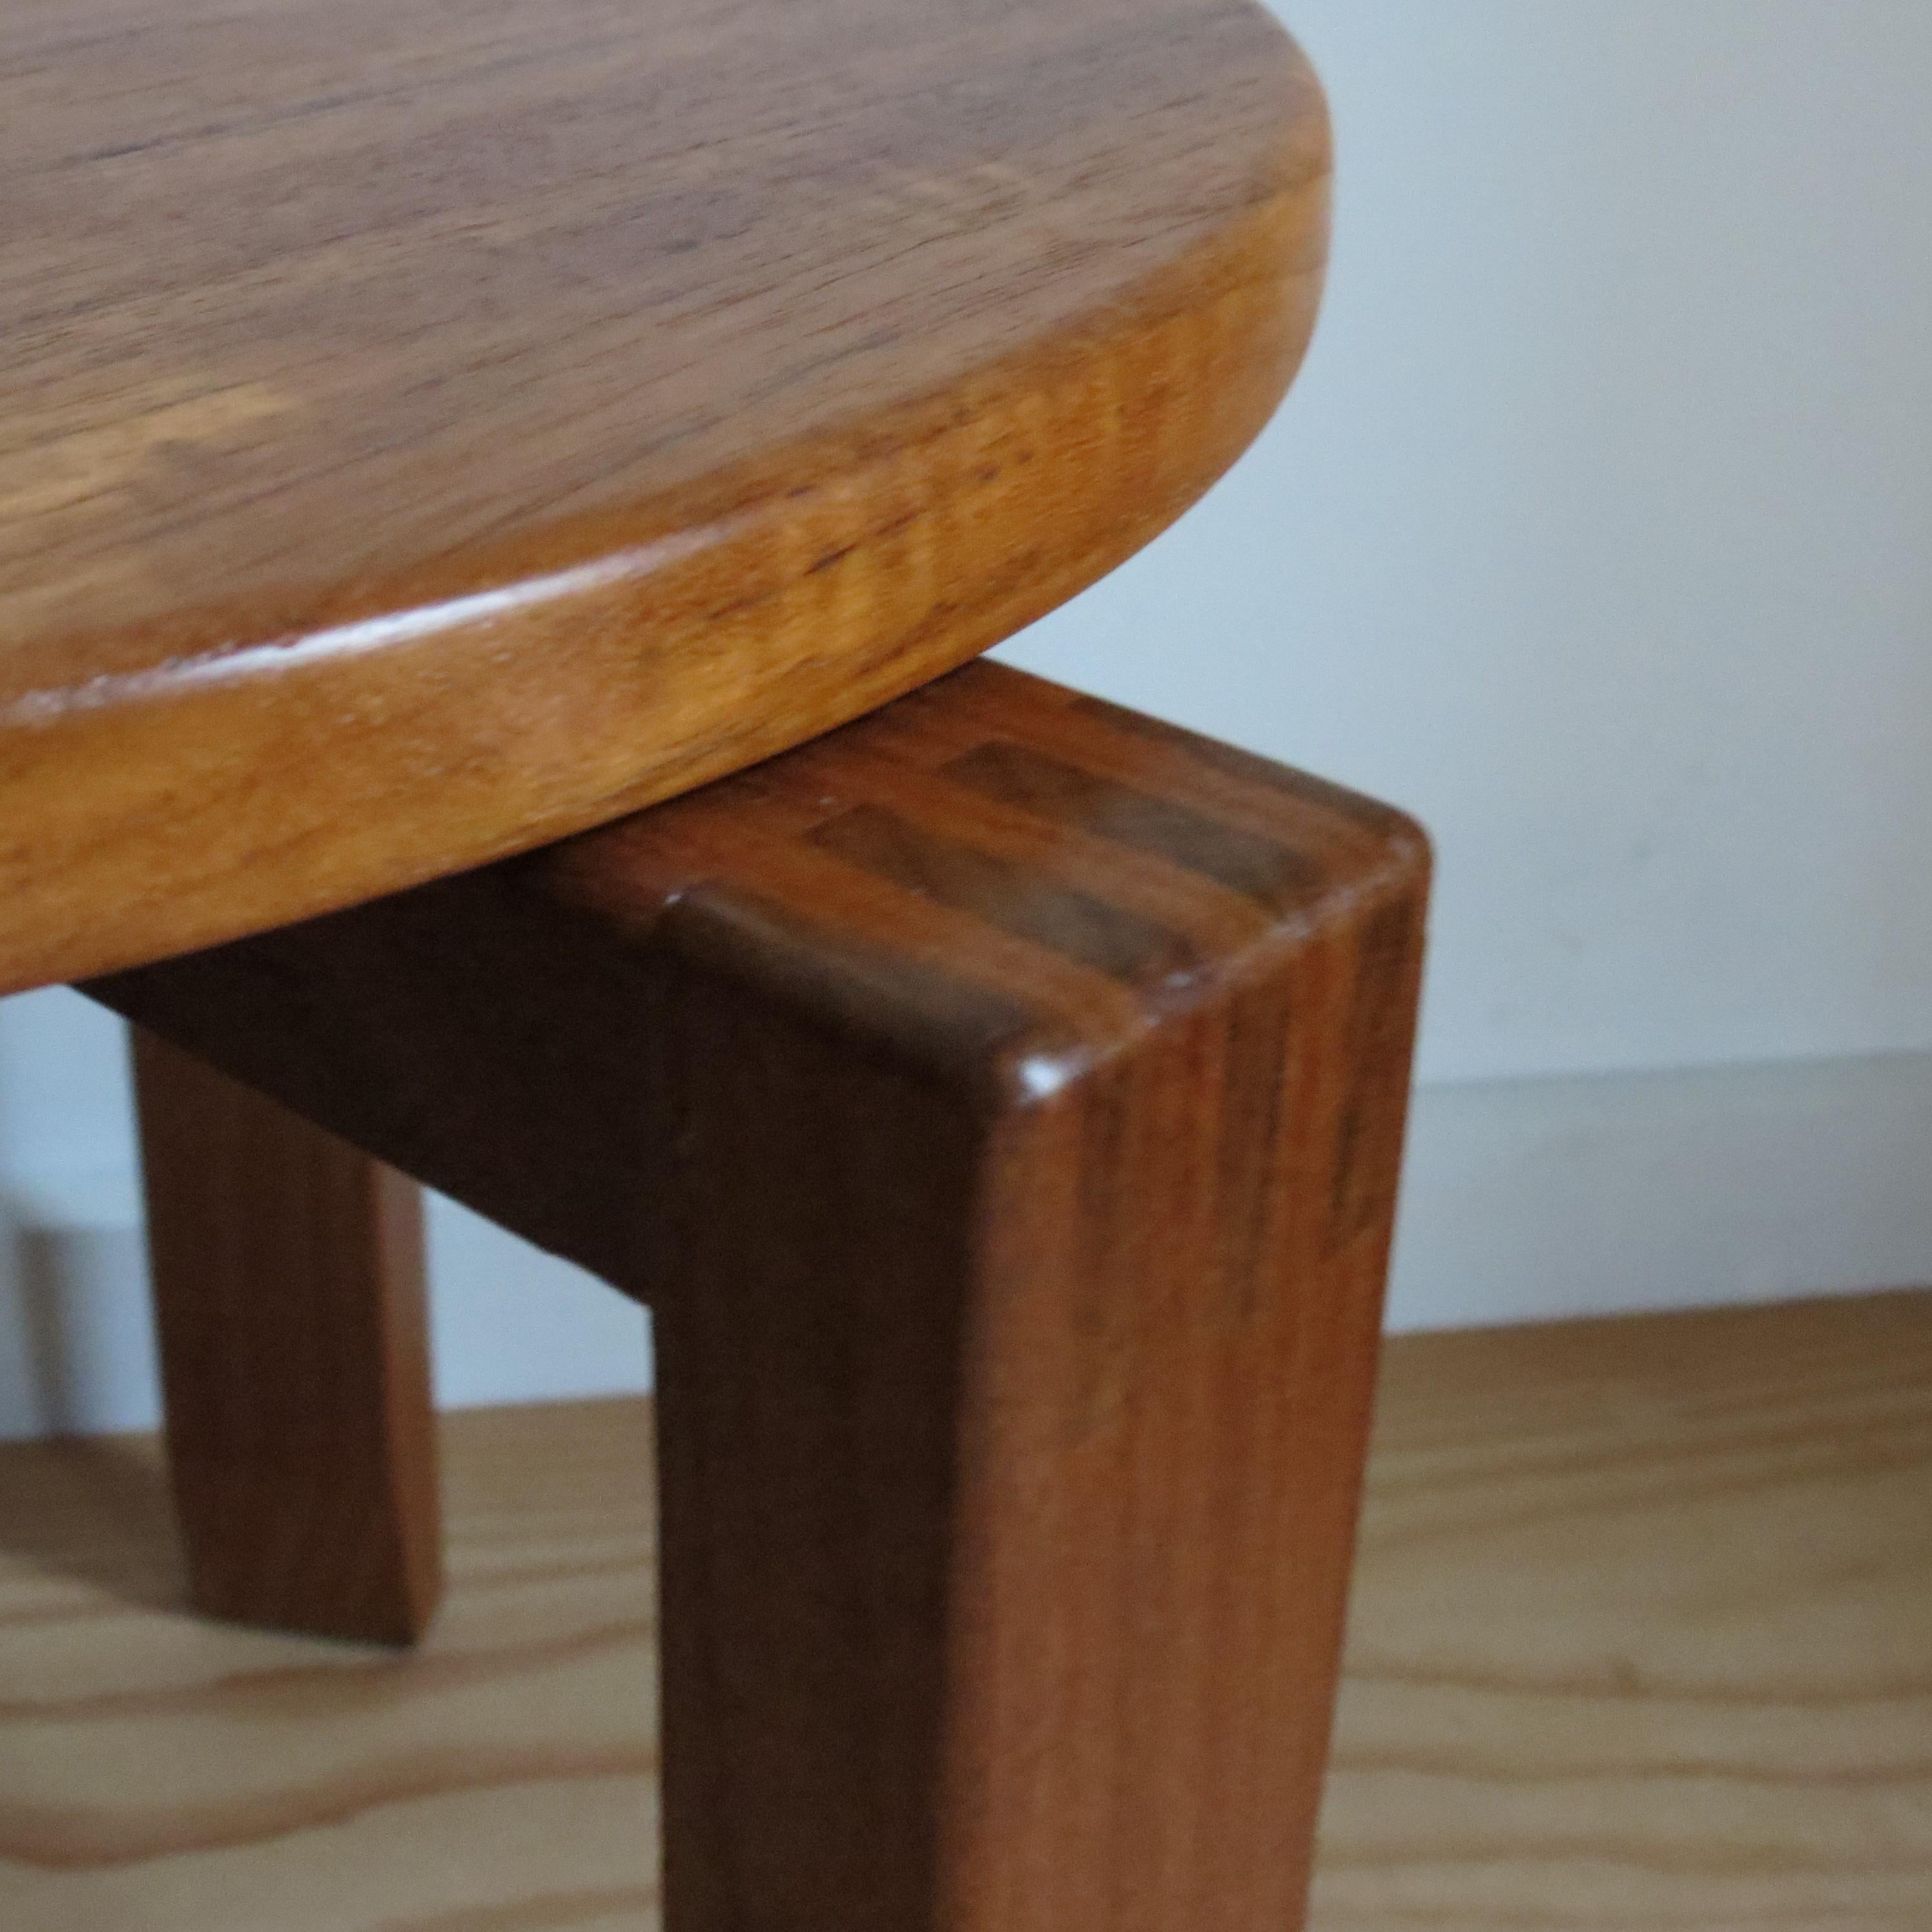 1960s Mid-century Small Circular Three Legged Table in Afromosia and Teak For Sale 6